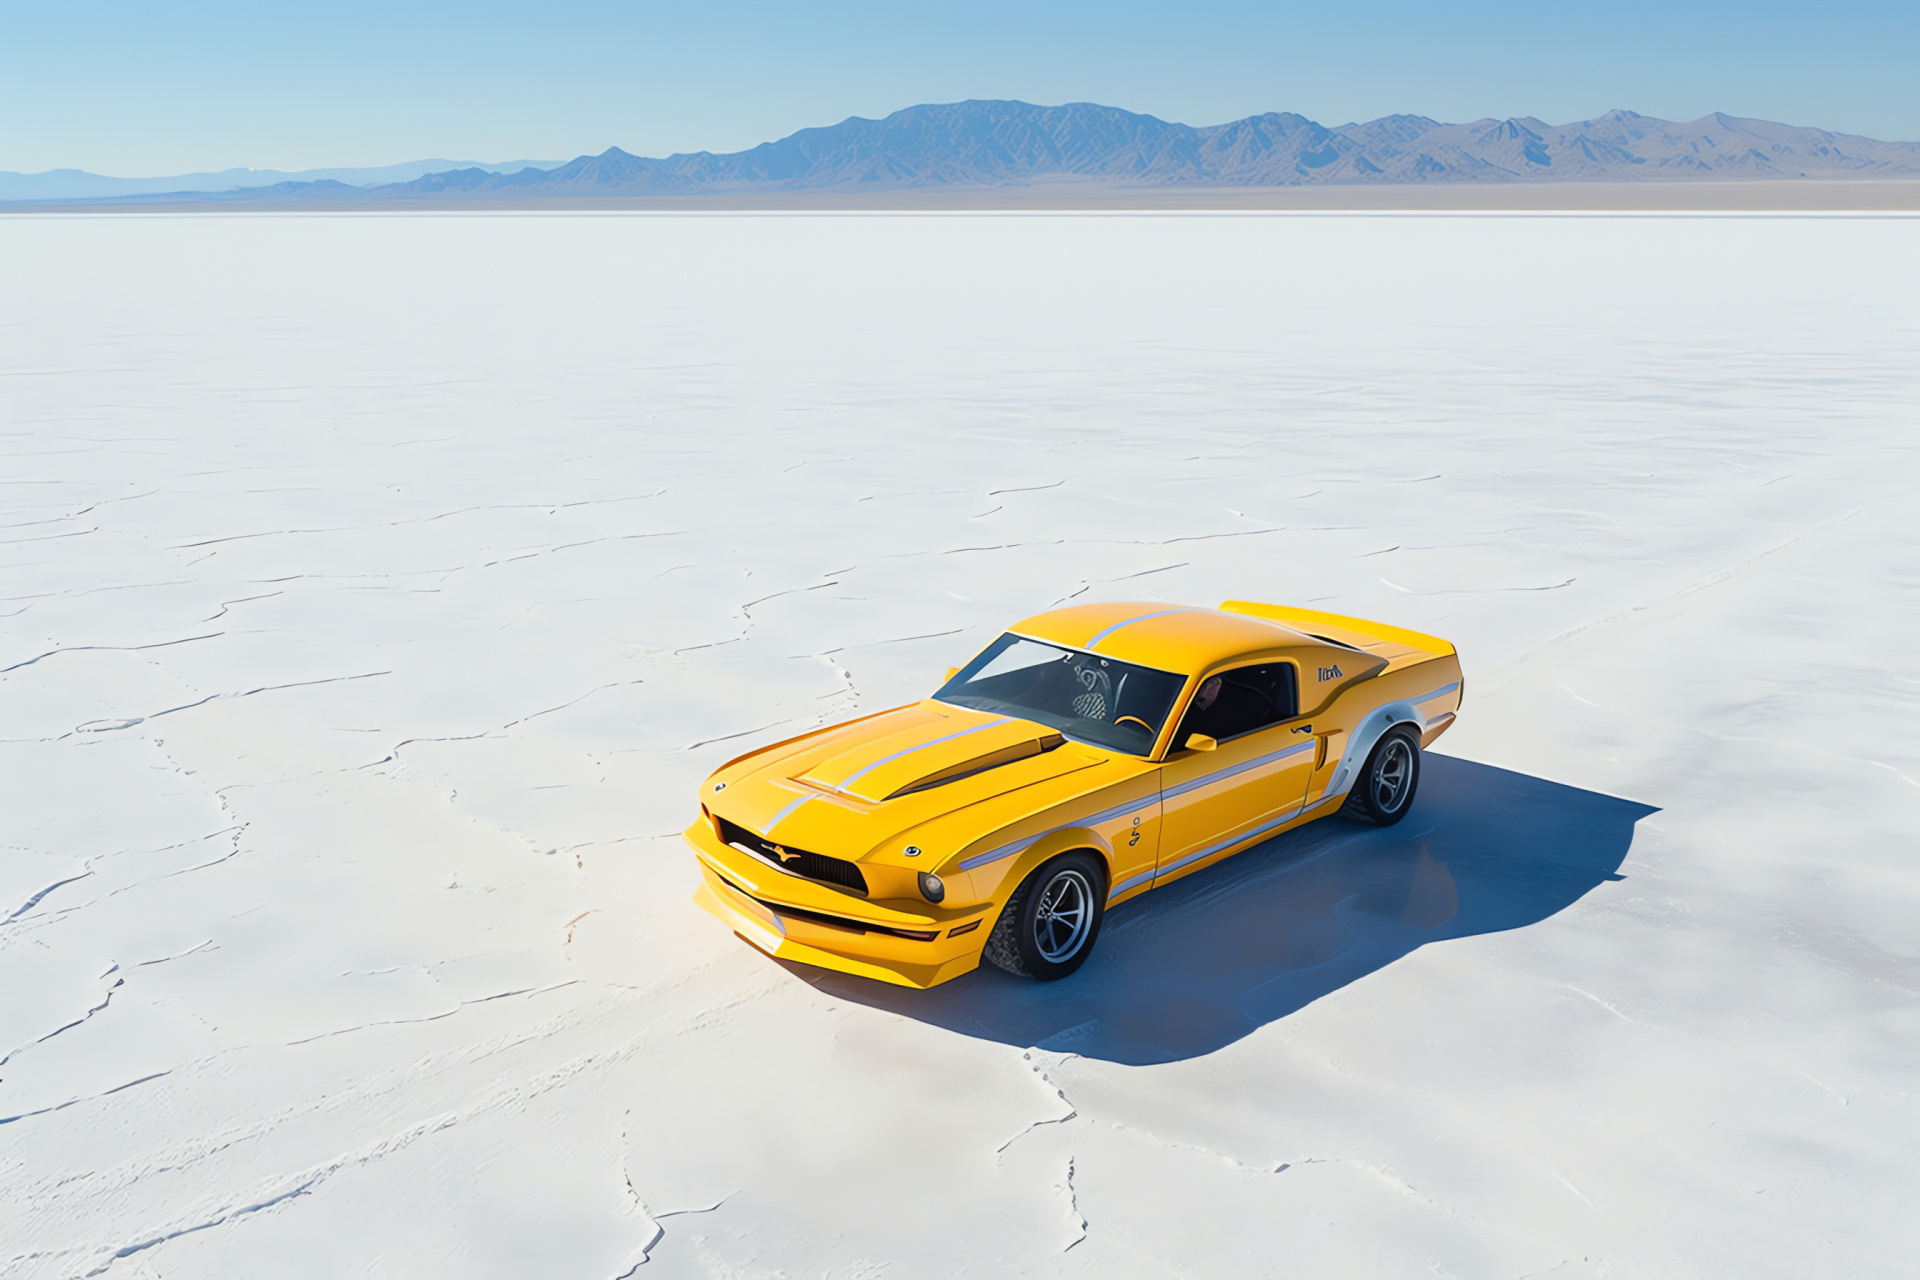 Ford Mustang Mach 1, Salt Flats expanse, Aerial desert view, Vivid blue and white contrast, Performance muscle car, HD Desktop Image